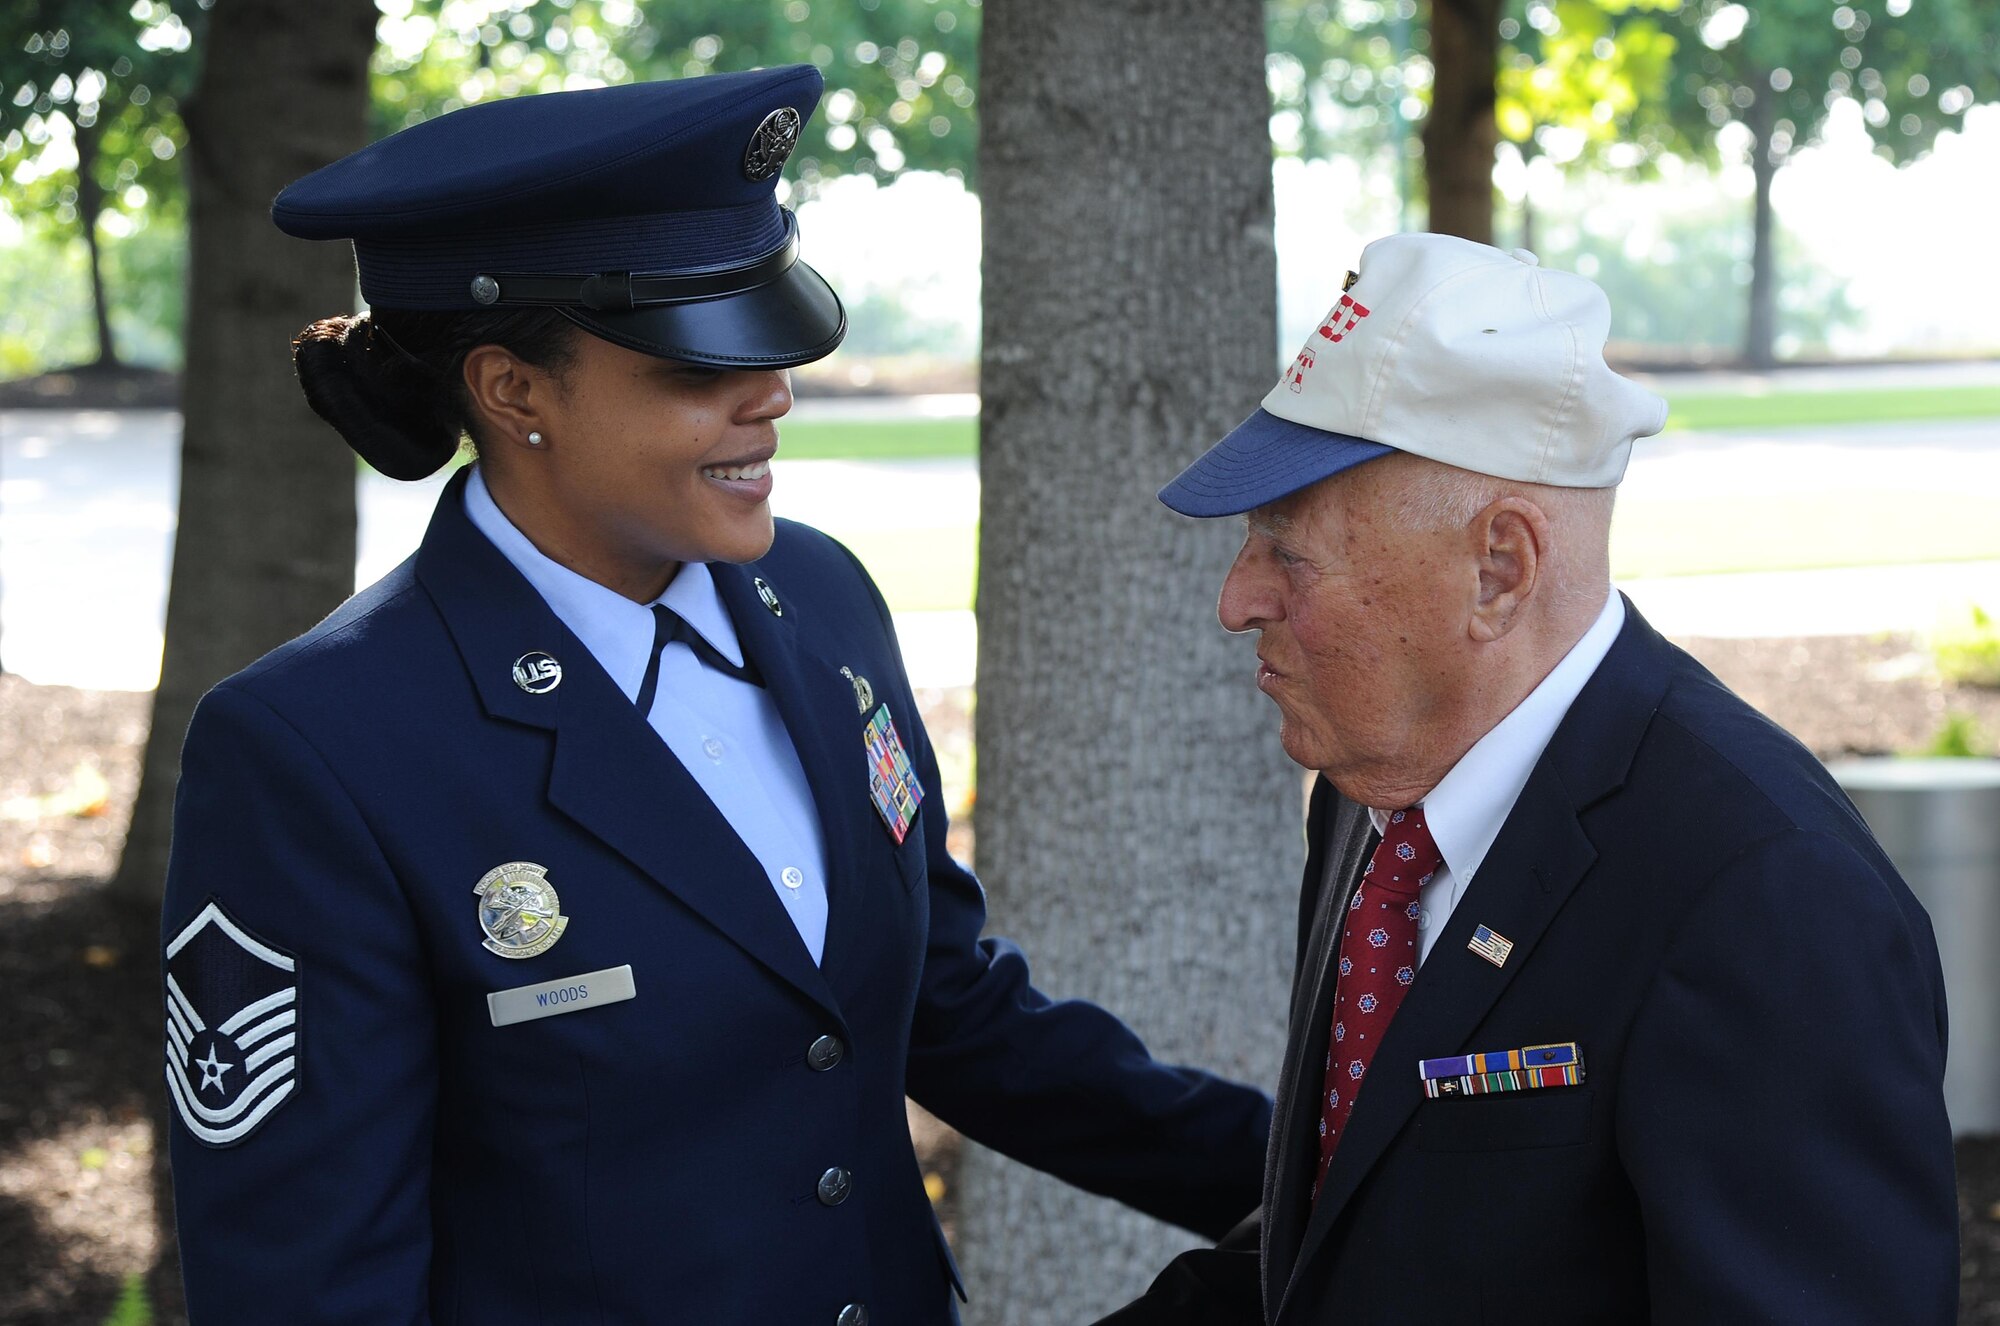 Master Sgt. Tamekia Wood, U.S.Air Force Honor Guard, assists  2nd Lt. (Ret.) John Pedevillano before his  Purple Heart award ceremony on July 14, 2017 at the U.S. Air Force Memorial, Arlington, Va.  Maj. Gen. James A. Jacobson, Air Force District of Washington commander, hosted the Purple Heart award ceremony and presented the prestigious award to 2nd Lt. (Ret.) John Pedevillano for wounds he incurred during a forced march as a World War II prisoner of war in Germany. Pedevillano, a B-17 bombardier pilot, and his crew assigned to the 306th Bomb Group of the “Mighty Eighth” Air Force were shot down during a bombing mission in airspace over Nazi Germany on April 24, 1944.  Per U.S. Army regulation, 600-8-22 Ch. 2, Par. 8, the Purple Heart is awarded in the name of the President of the United States to any member of the U.S. Armed Forces who, after April 5, 1917, has been wounded, killed, or has died from wounds while serving under competent authority in any capacity with one of the U.S. Armed Services. (U.S. Air Force Photo by Mr. James E. Lotz/)(Released) 